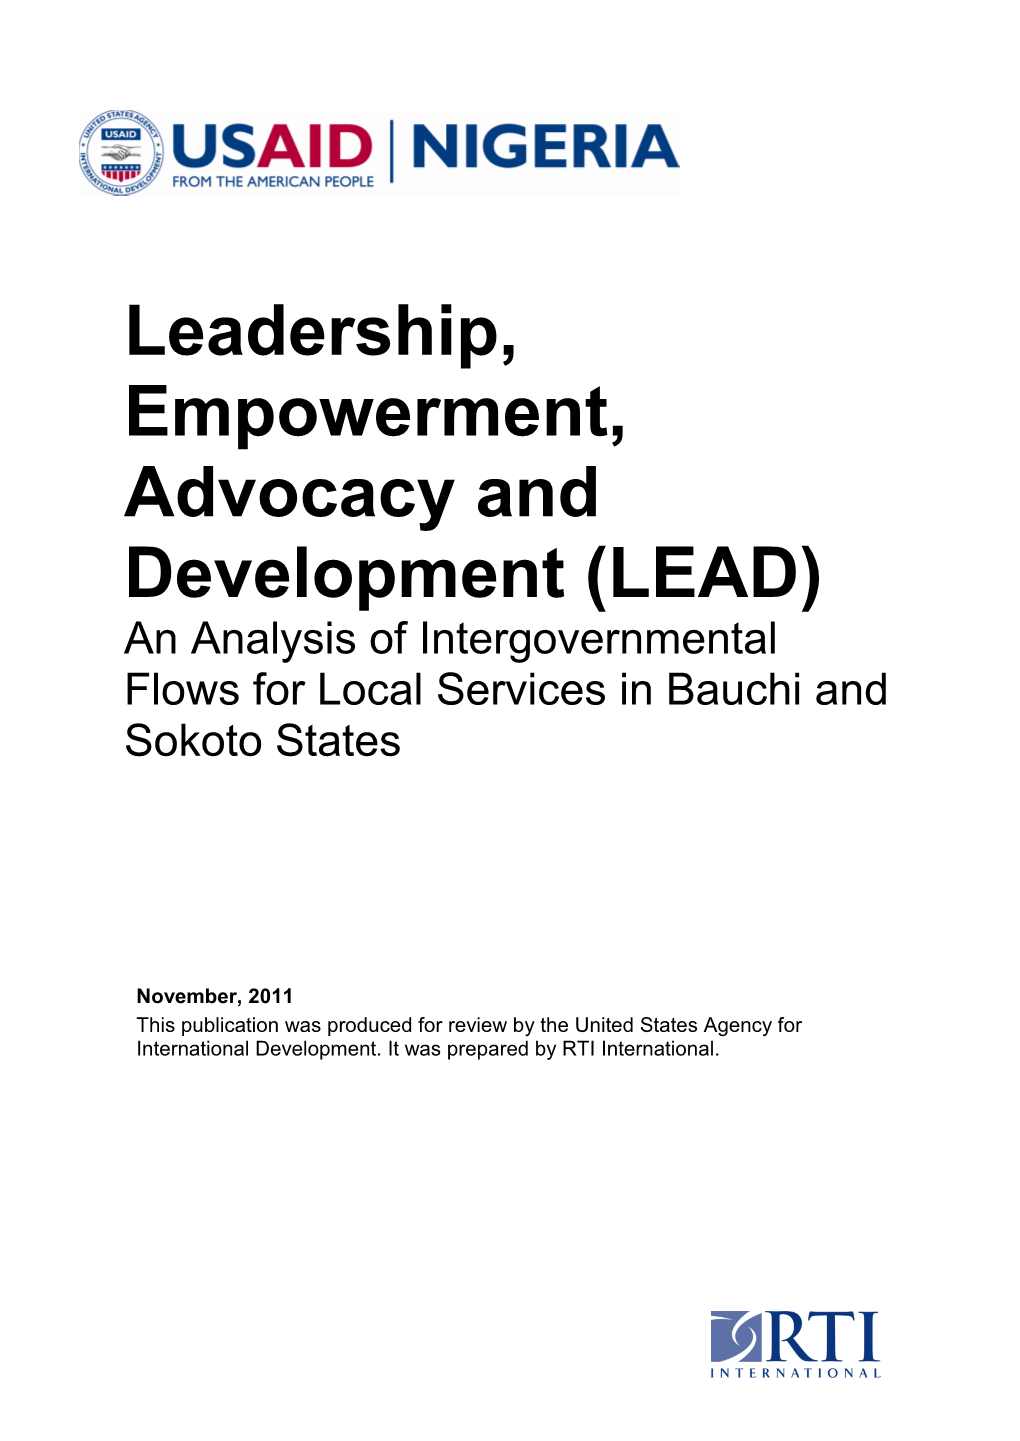 Leadership, Empowerment, Advocacy and Development (LEAD) an Analysis of Intergovernmental Flows for Local Services in Bauchi and Sokoto States